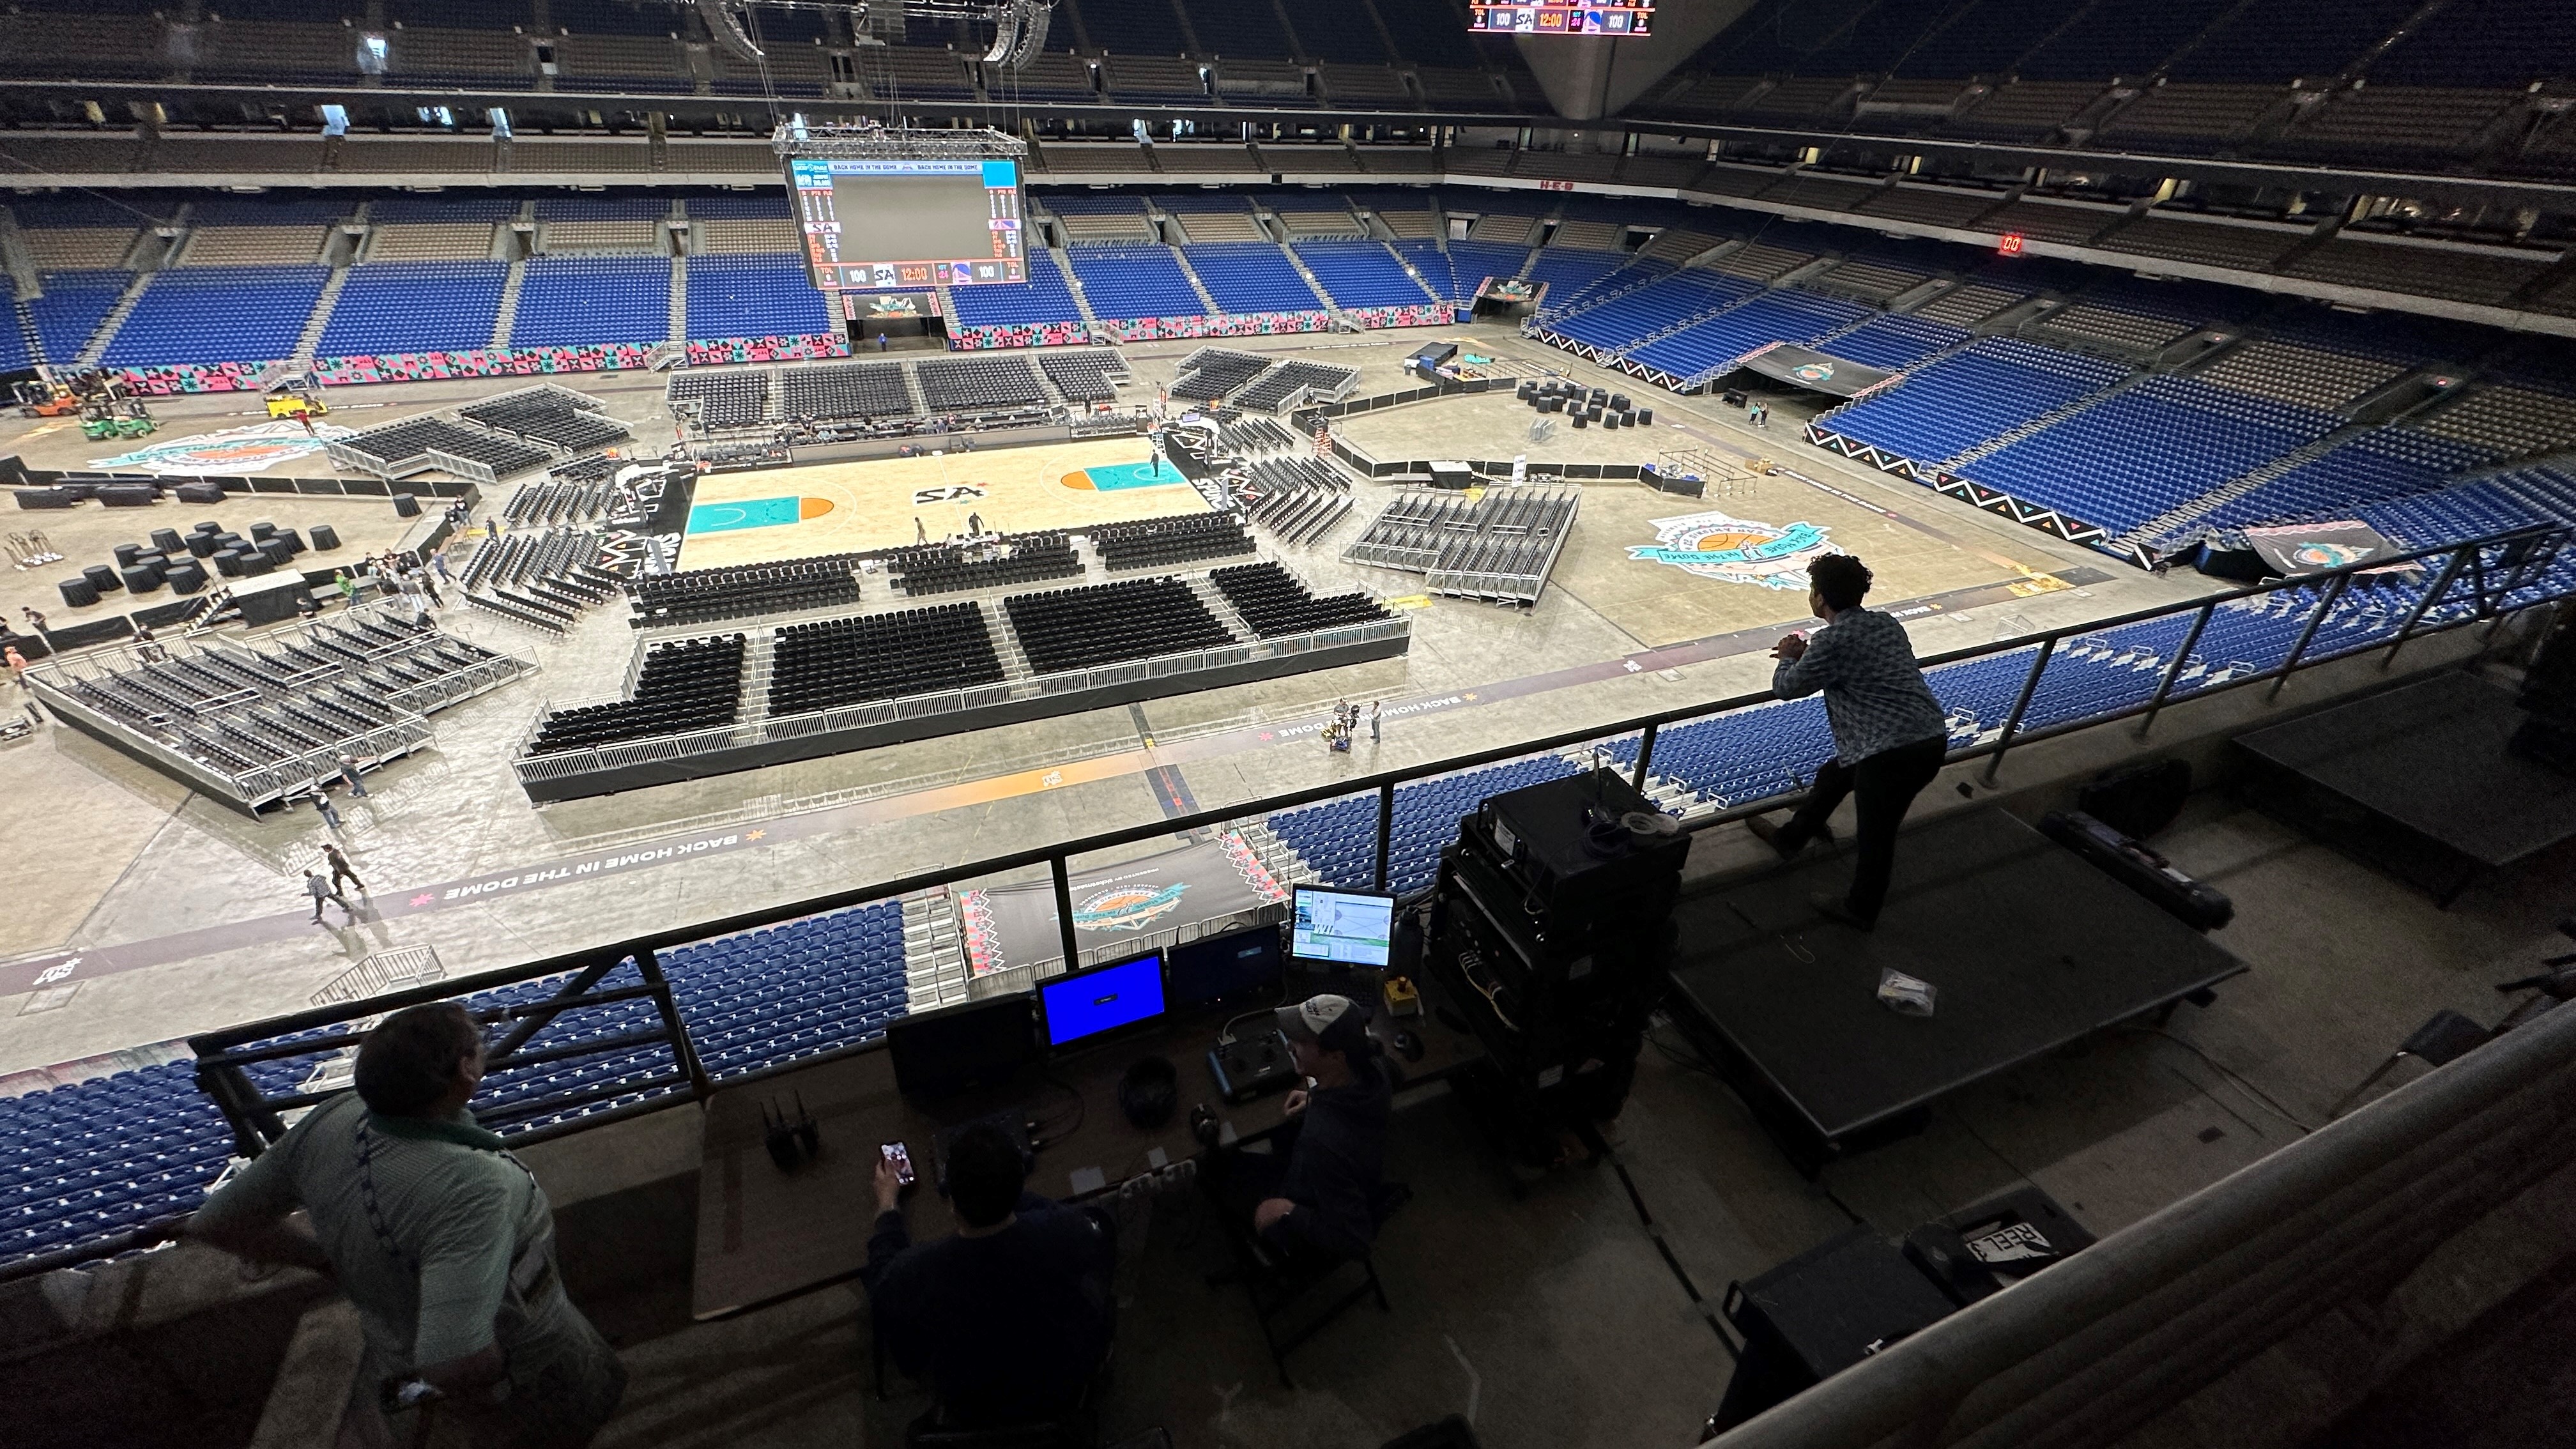 Why are Warriors, Spurs playing in Alamodome? San Antonio returns